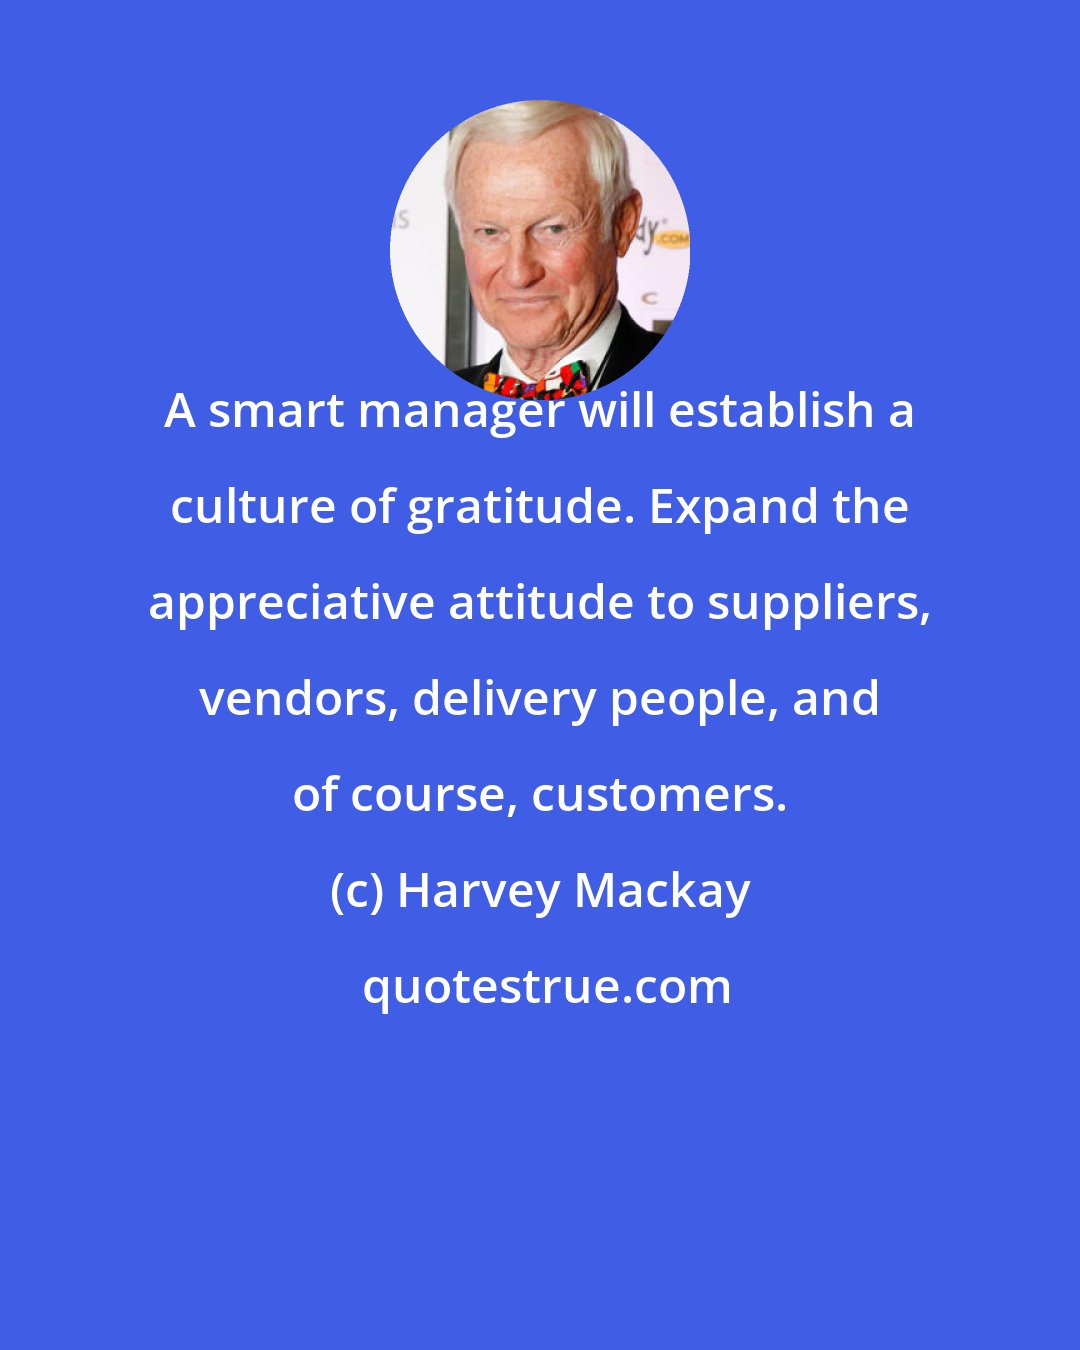 Harvey Mackay: A smart manager will establish a culture of gratitude. Expand the appreciative attitude to suppliers, vendors, delivery people, and of course, customers.